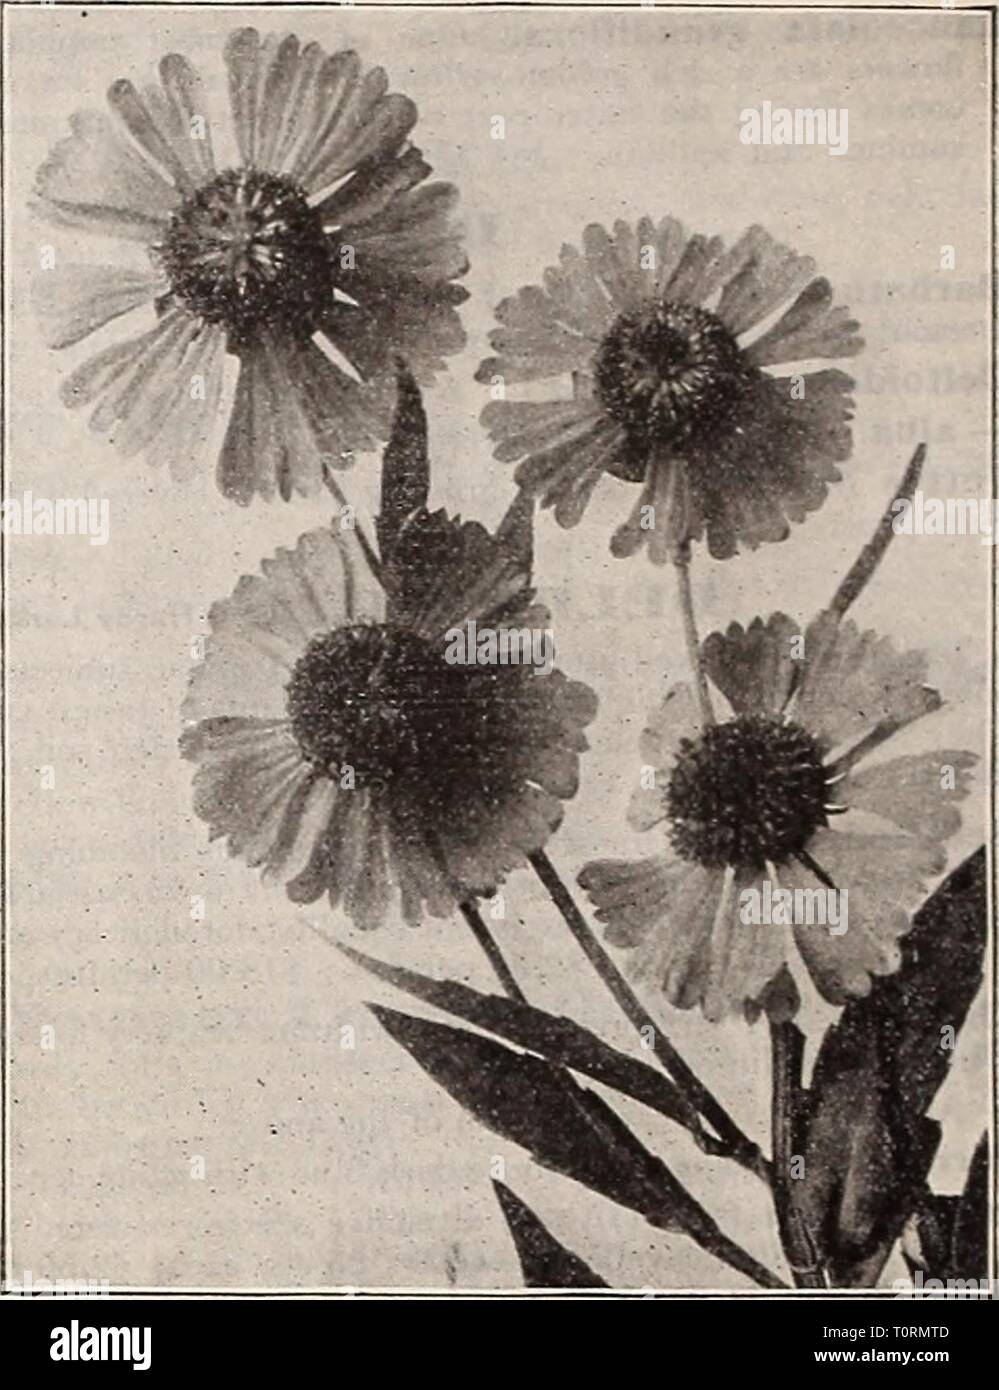 Dreer's 1910 autumn catalogue (1910) Dreer's 1910 autumn catalogue  dreers1910autumn1910henr Year: 1910  48 Mf A DRKR-PHILADELPHIA'PA HARDY PERENNIAL PLANTS- GAILLARDIA Blanket Rower!, Urandifiora. One of the showiest and most effective hardy plants, growing about two feet high; beginning to flower in June the)- con- tinue one mass of bloom the entire season. The large flowers are of gorgeous coloring. The centre is dark red brown, while the petals are variously marked with rings of brilliant scarlet-crimson, orange and vermilion. Excellent for cutting. GYPSOPHILA (Baby's Breath . Acutifolia.  Stock Photo